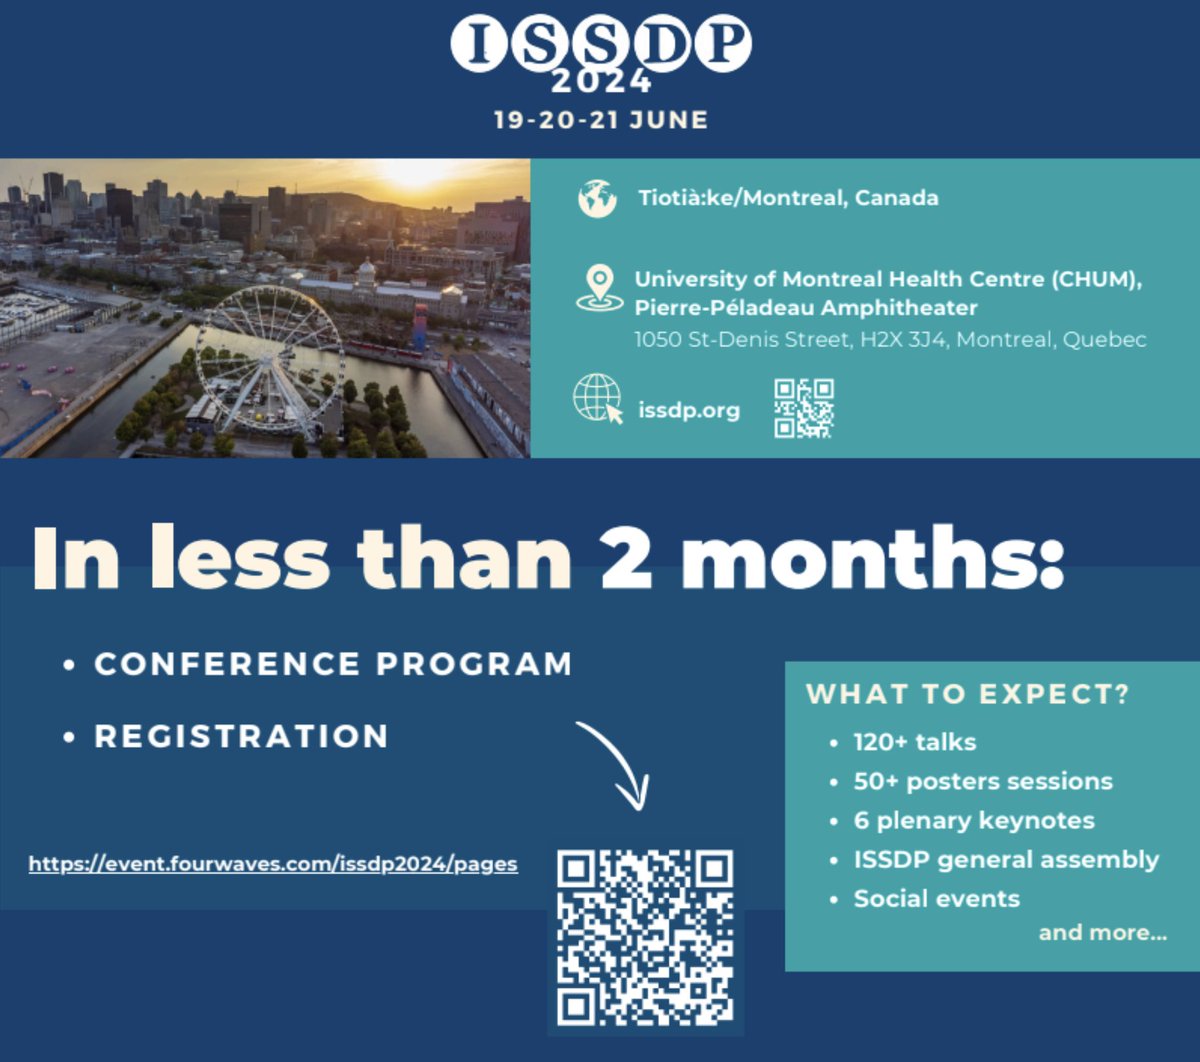 Save the date of the annual @ISSDrugPolicy conference in Montreal, Canada this year on June 19th to 21st. It’s going to be a blast. Don’t miss out on our annual event! issdp.org